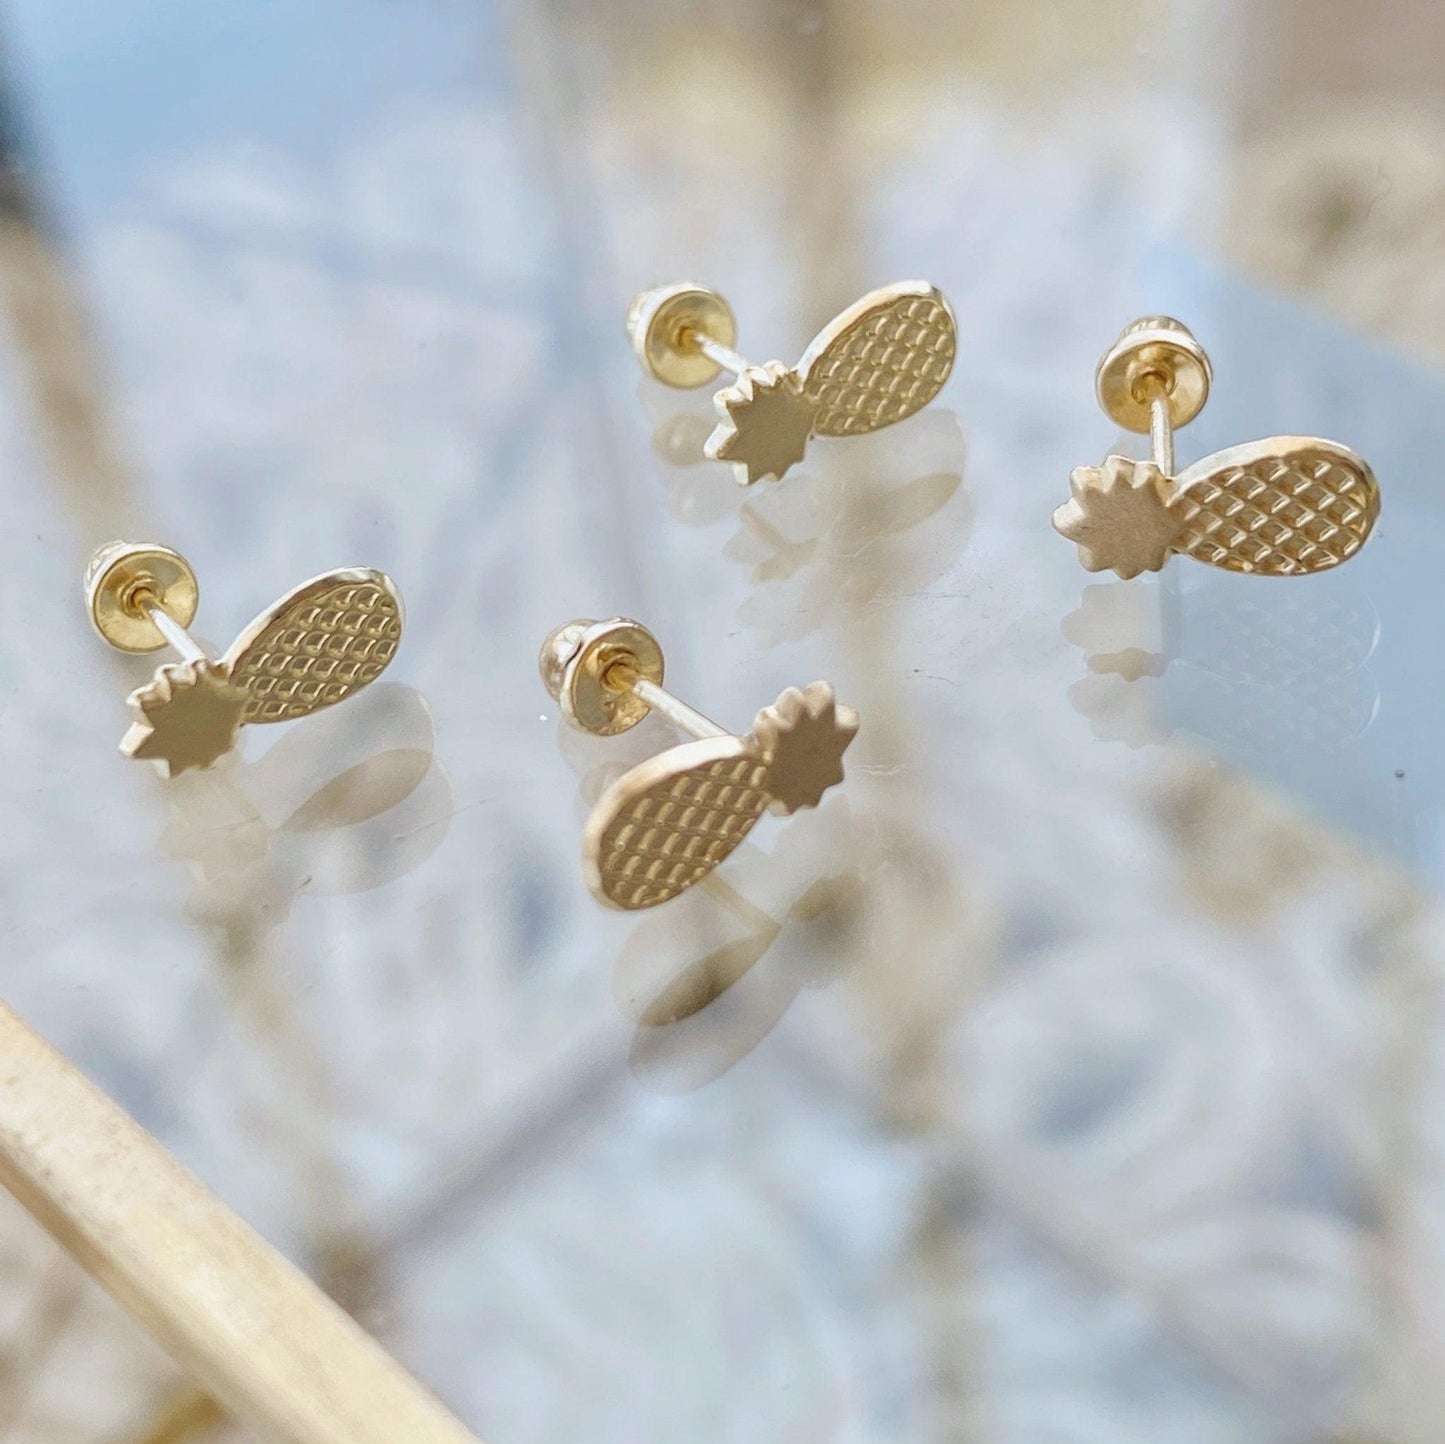 Load image into Gallery viewer, Our Pineapple Fruit Earrings are made with 10K gold and are a dainty and minimal pair of earrings that are perfect for everyday wear. Inspired by the tropical pineapple fruit, our pineapple studs have a screw back earring post so they fit more snugly in your ears.
